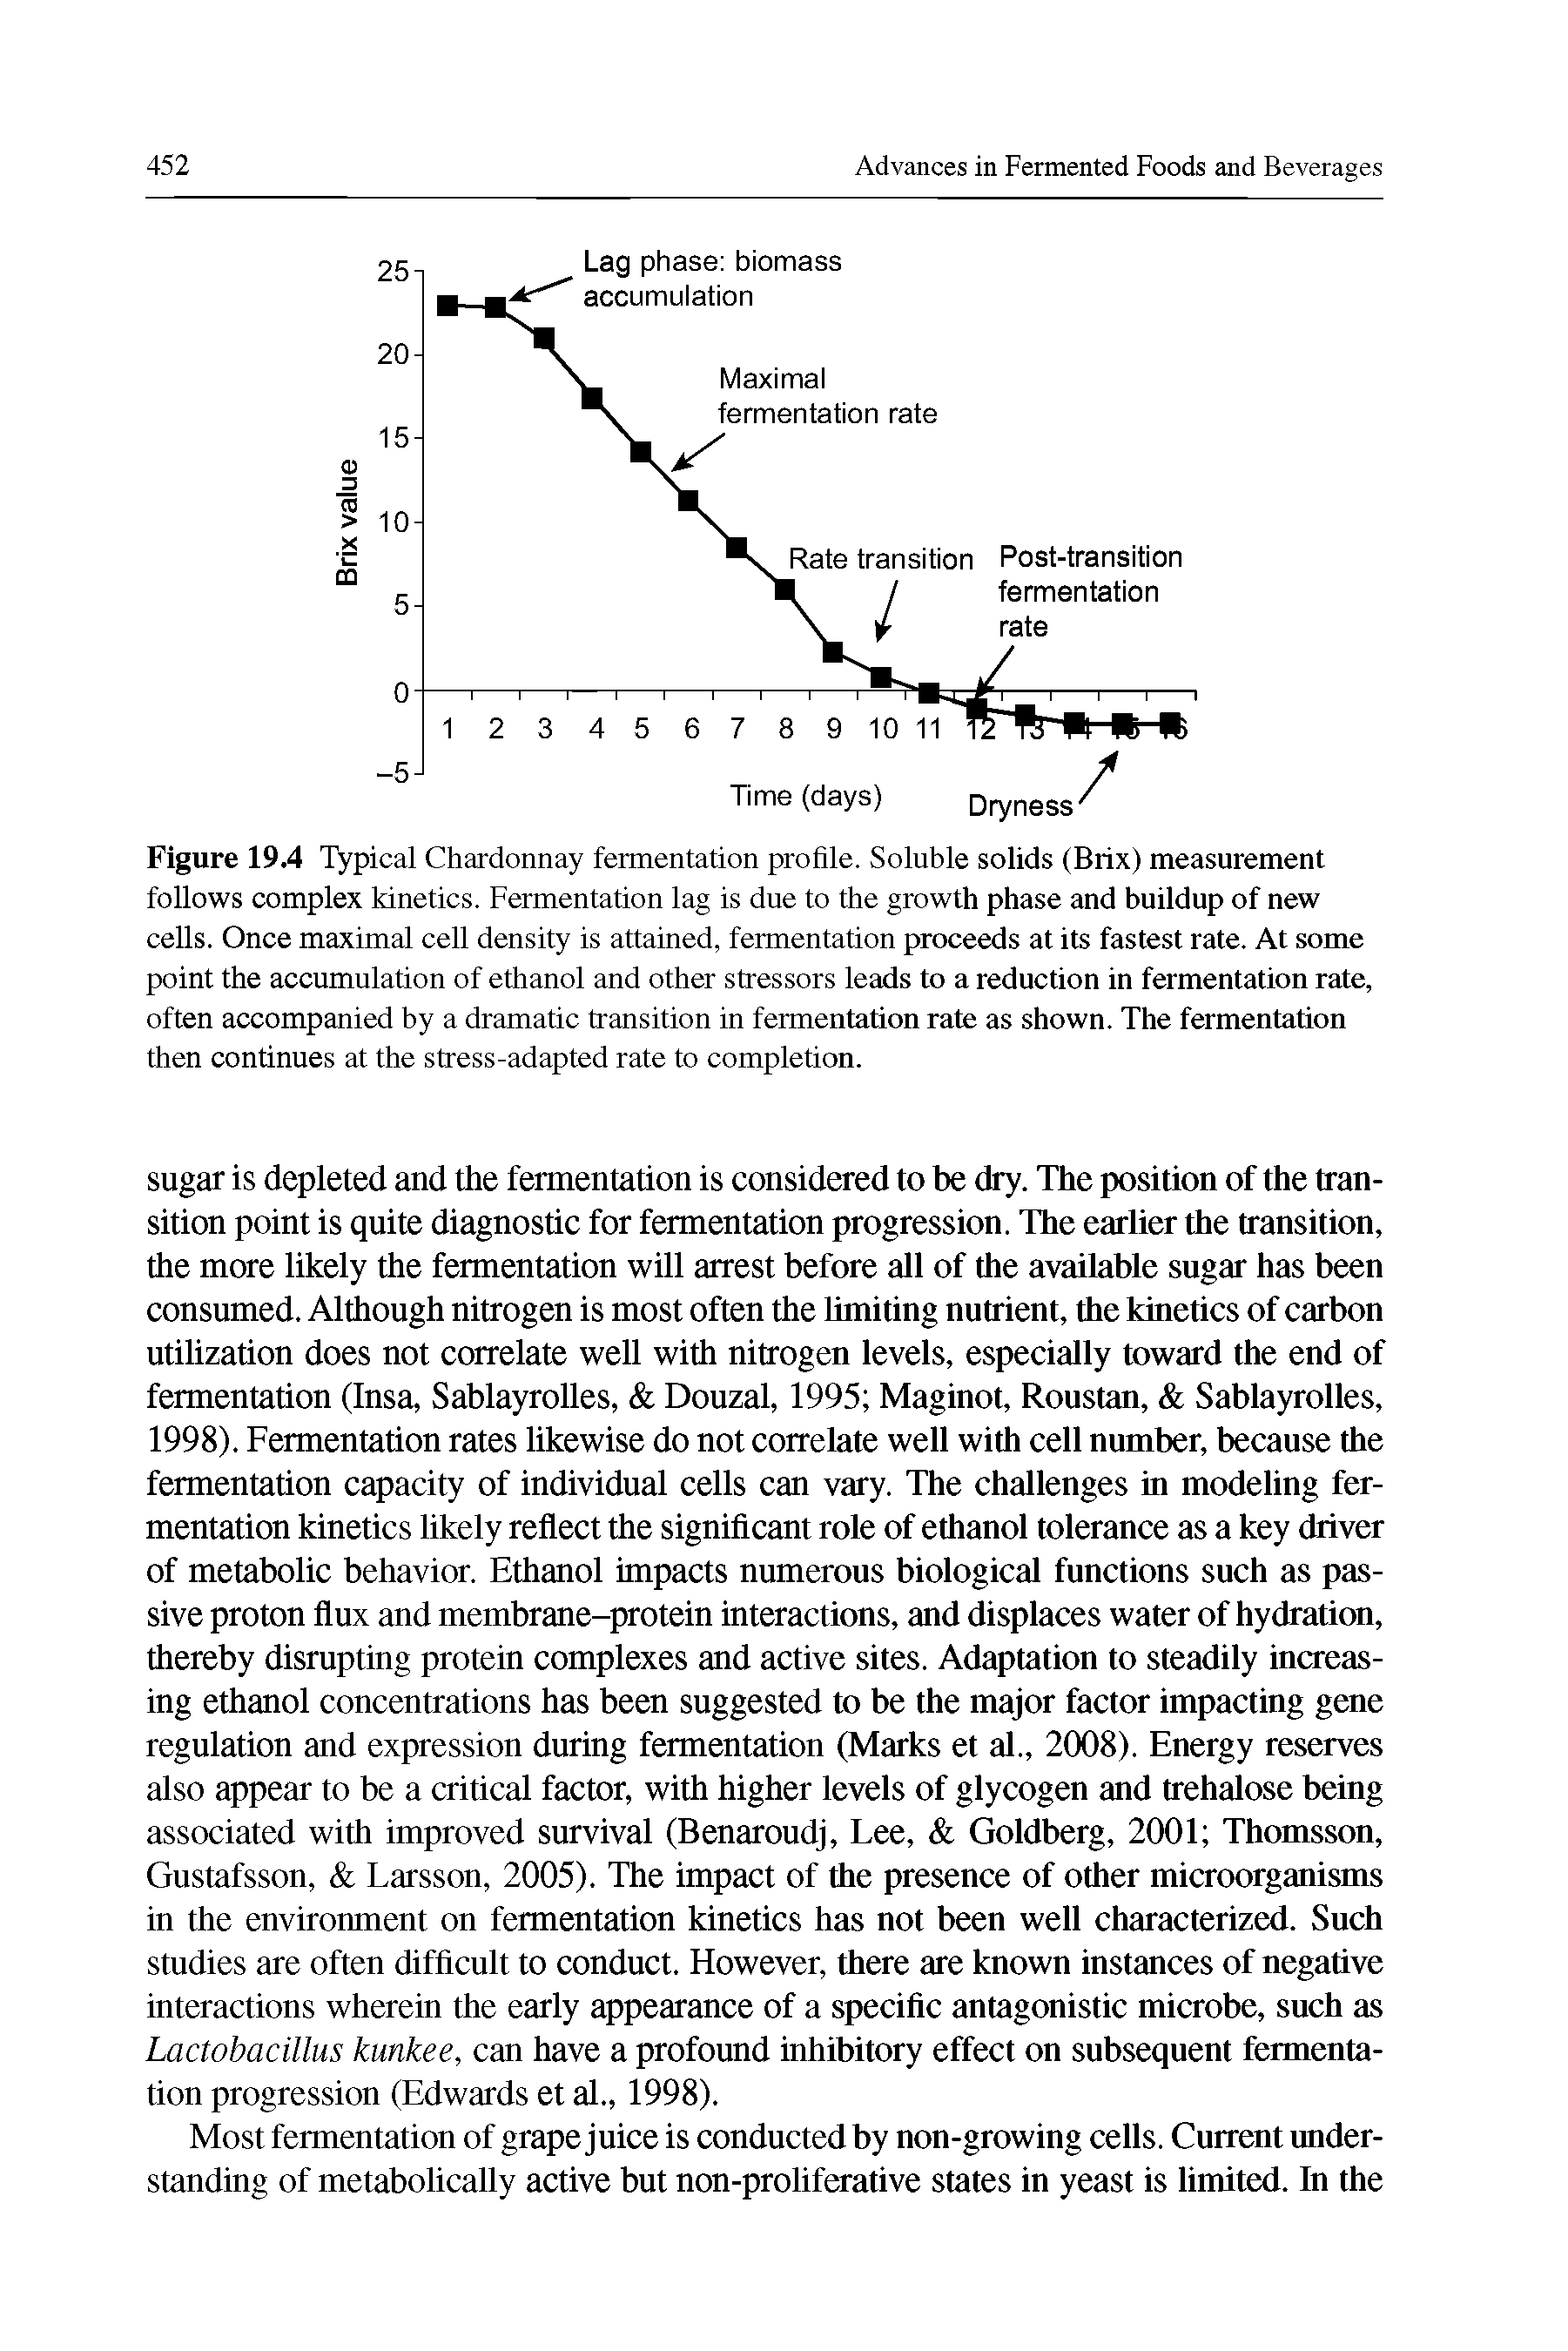 Figure 19.4 Typical Chardonnay fermentation profile. Soluble solids (Brix) measurement follows complex kinetics. Fermentation lag is due to the growth phase and buildup of new cells. Once maximal cell density is attained, fermentation proceeds at its fastest rate. At some point the accumulation of ethanol and other stressors leads to a reduction in fermentation rate, often accompanied by a dramatic transition in fermentation rate as shown. The fermentation then continues at the stress-adapted rate to completion.